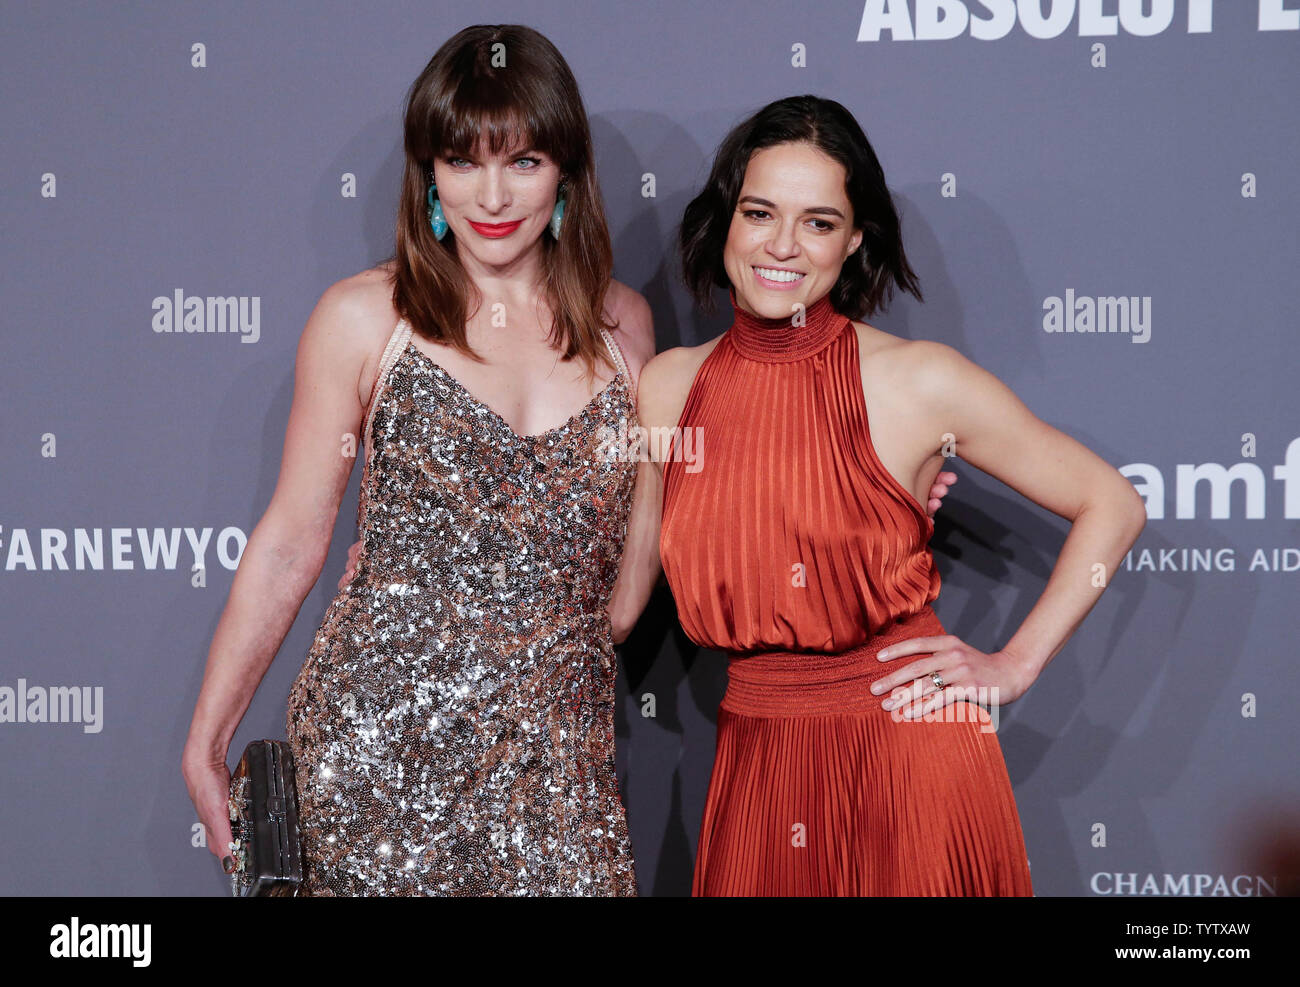 Milla Jovovich and Michelle Rodriguez arrive on the red carpet at the amfAR New York Gala 2019 at Cipriani Wall Street on February 6, 2019 in New York City.     Photo by John Angelillo/UPI Stock Photo